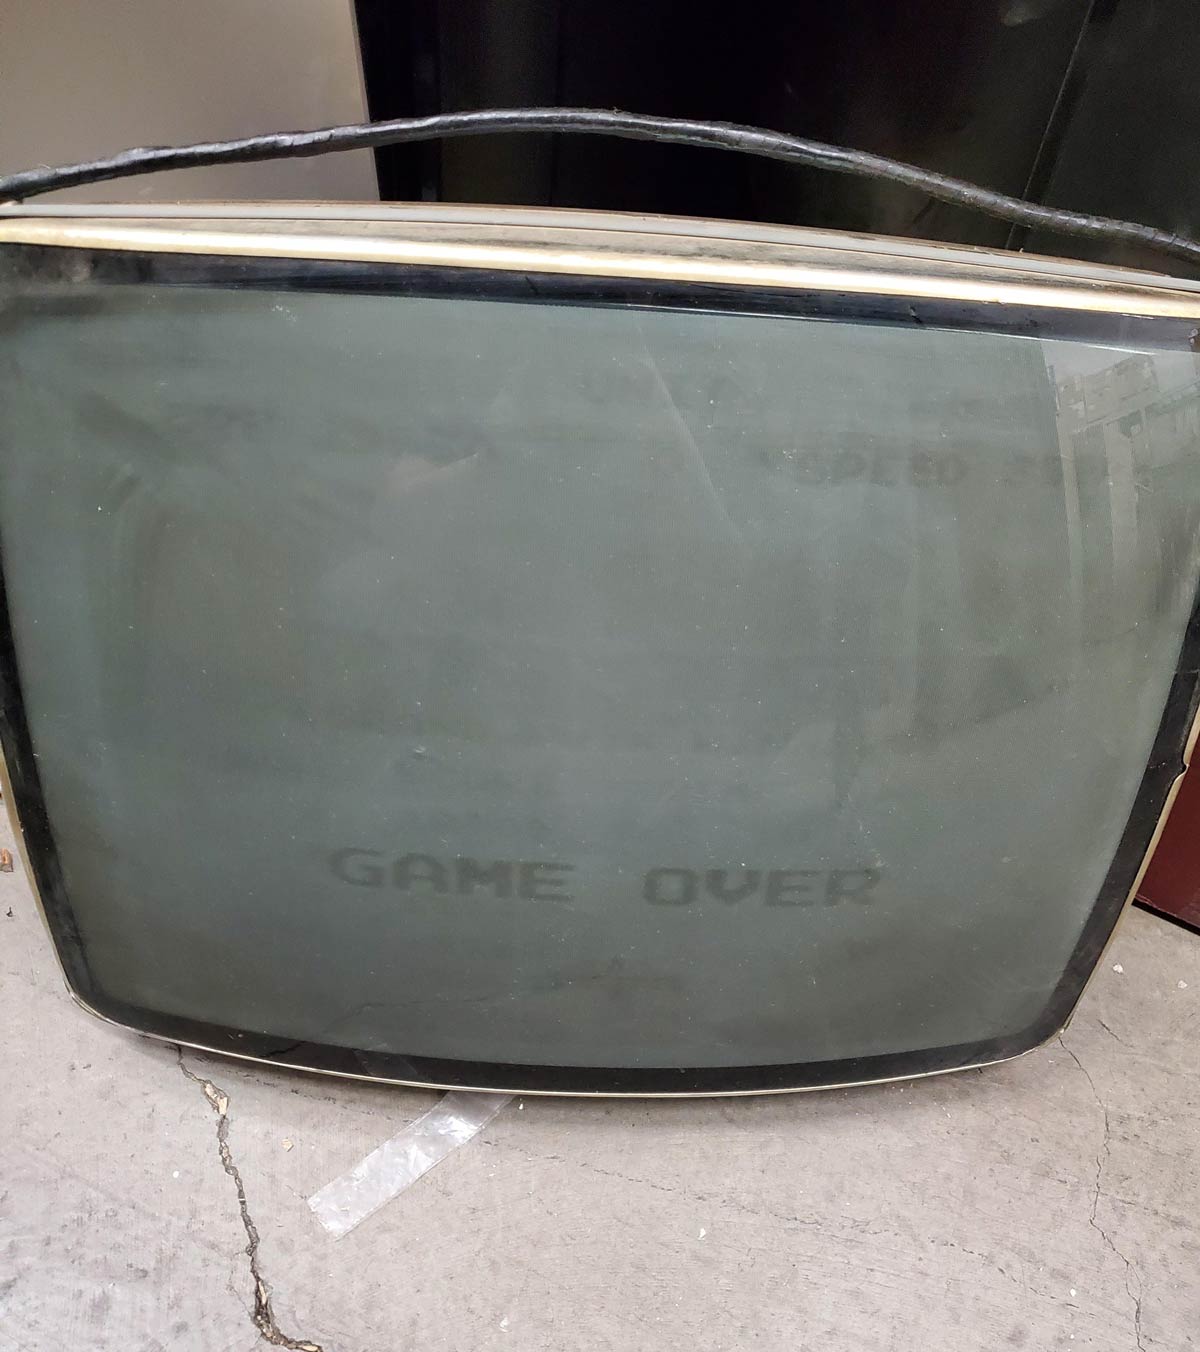 A broken tube TV in my work has GAME OVER burnt into the screen